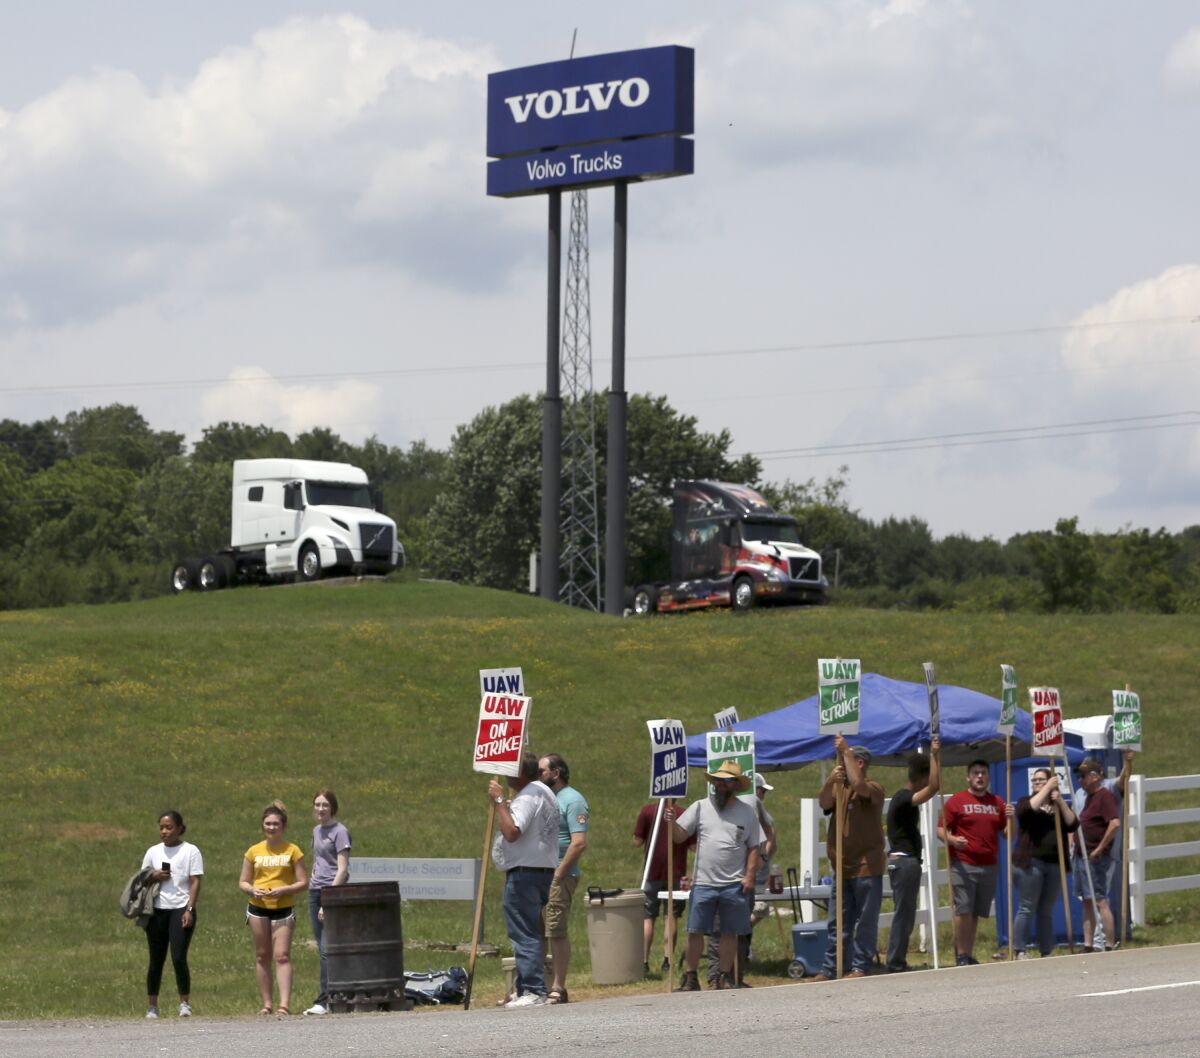 FILE - In this June 18, 2021 file photo, UAW Members strike outside the Volvo Trucks North America plant in Dublin, Va. With Help Wanted signs at factories and businesses spreading across the nation, in manufacturing and in service industries, union workers like those at the Volvo site are seizing the opportunity to try to recover some of the bargaining power — and financial security — they feel they lost in recent decades as unions shrank in size and influence. (Matt Gentry/The Roanoke Times via AP)